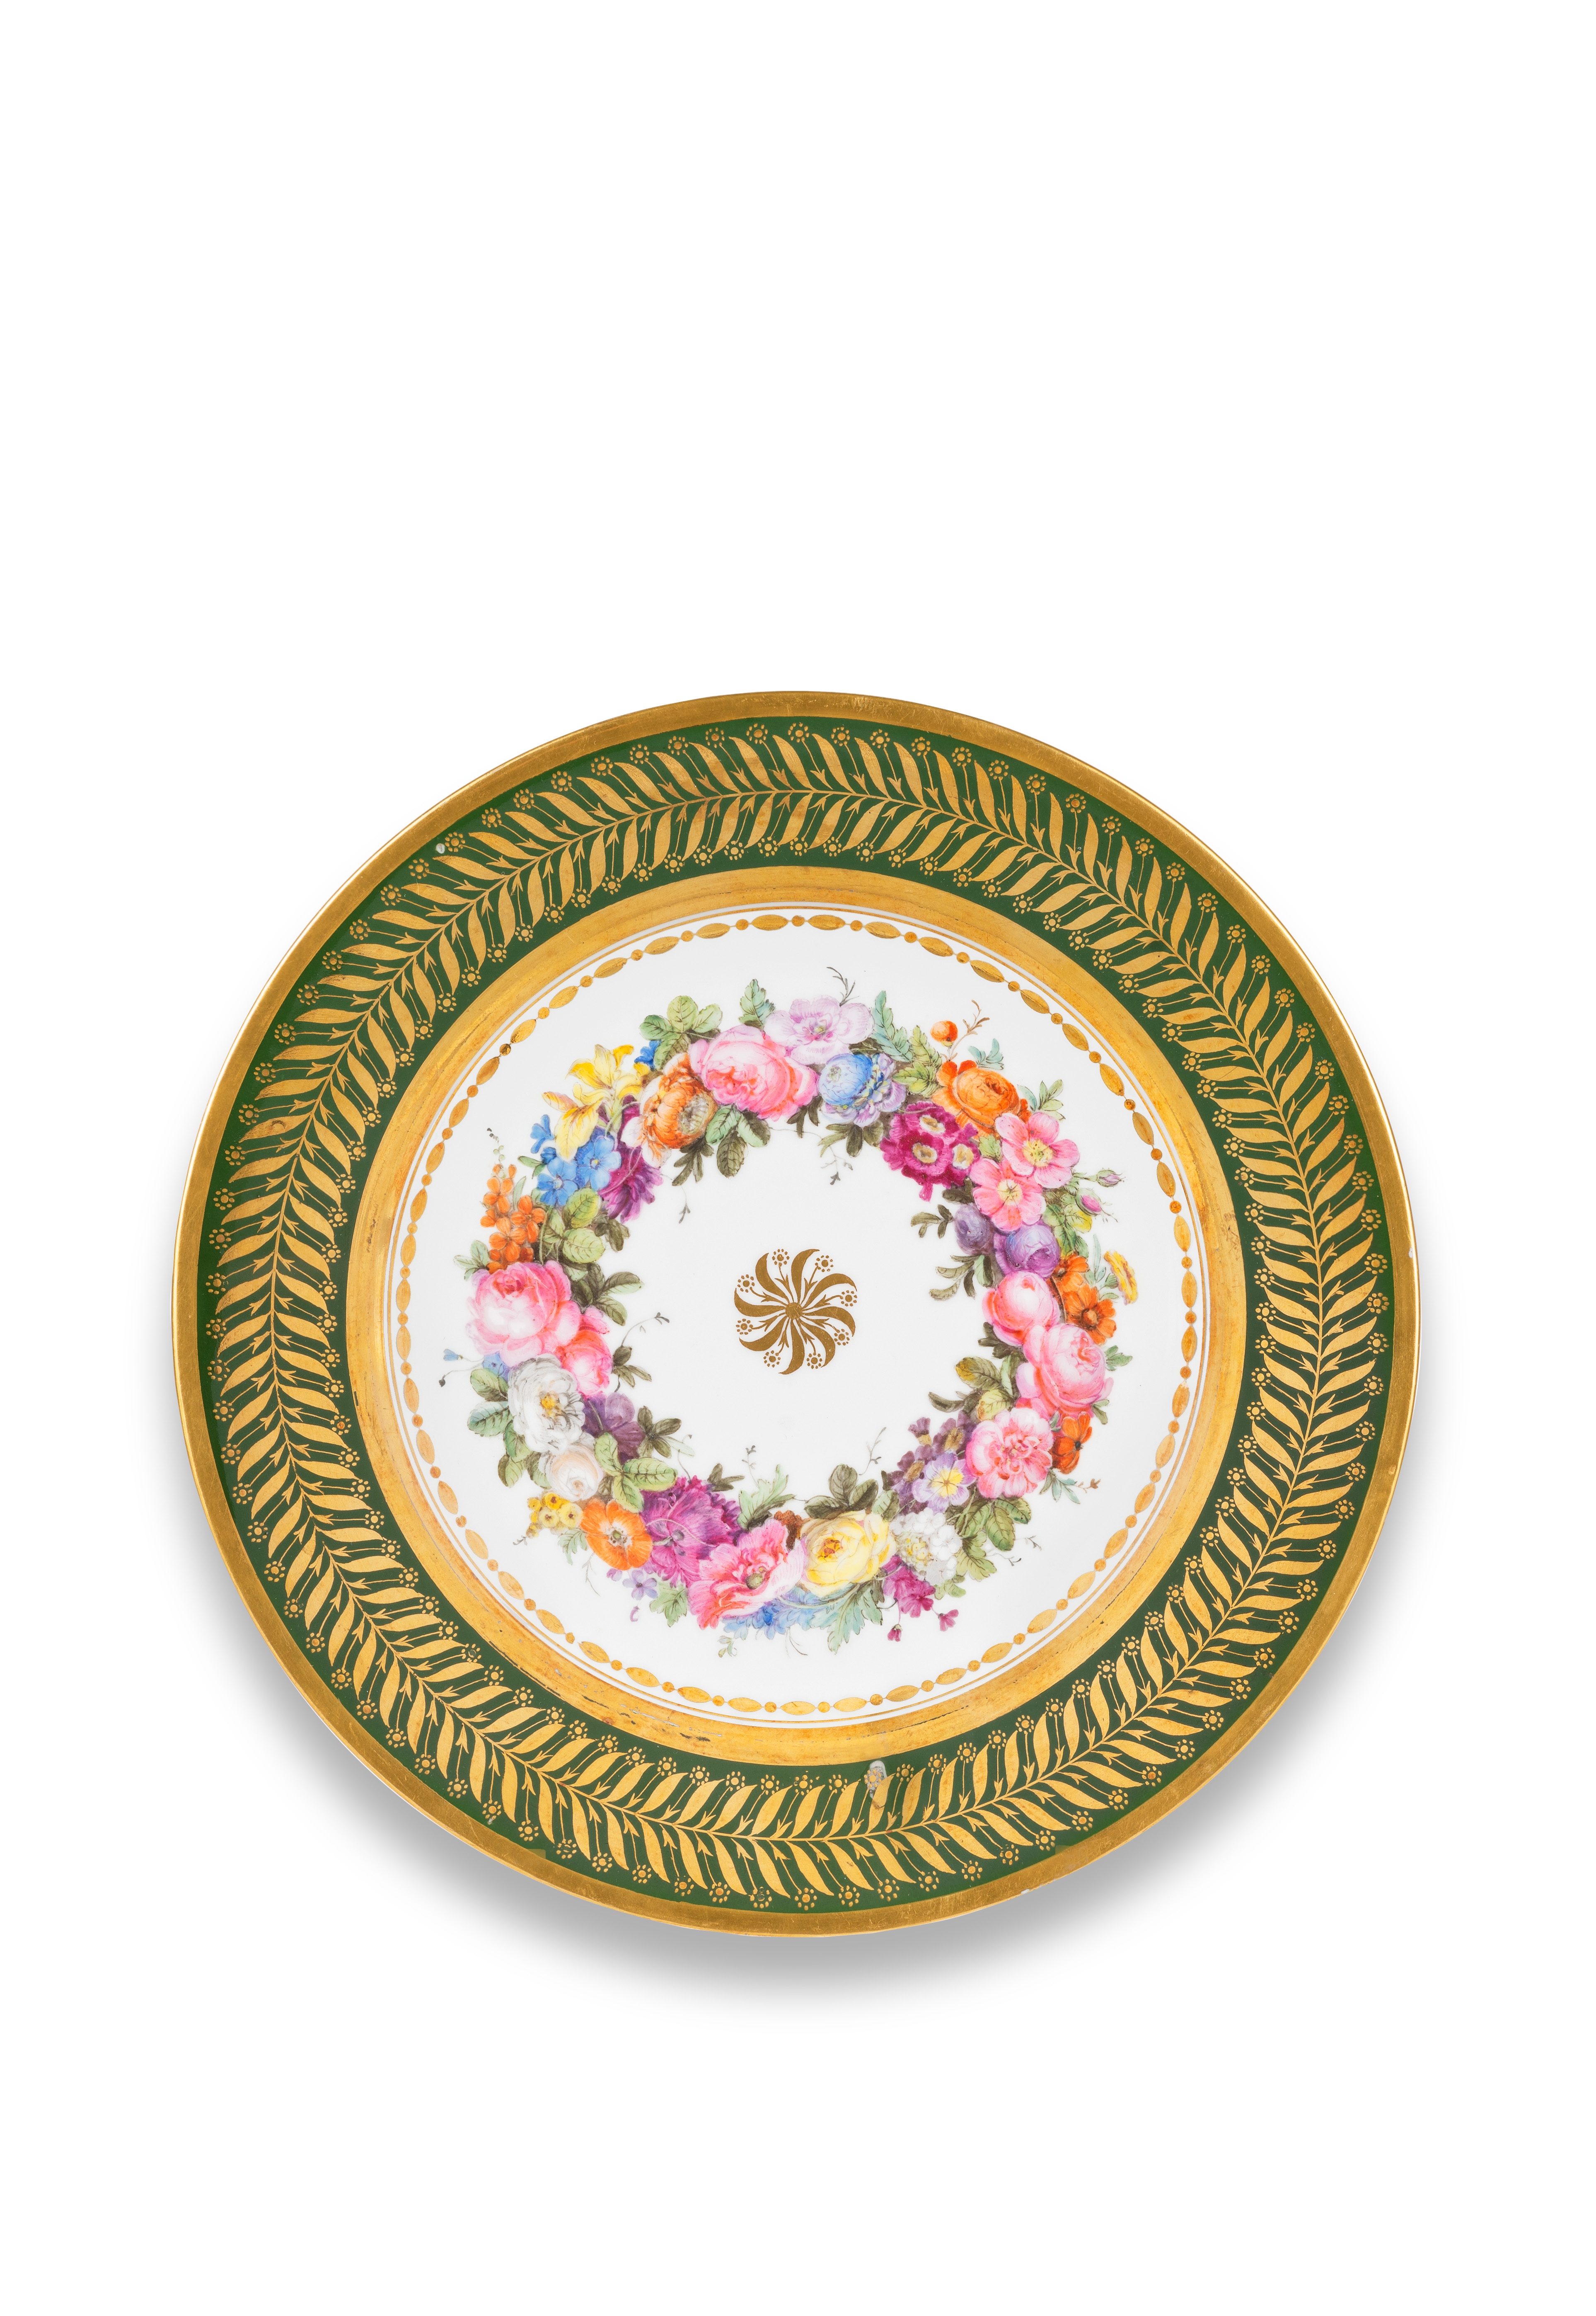 A S&#232;vres plate from 'service d'Italie' for the Prince and Princess Borgh&#232;se, circa 1808